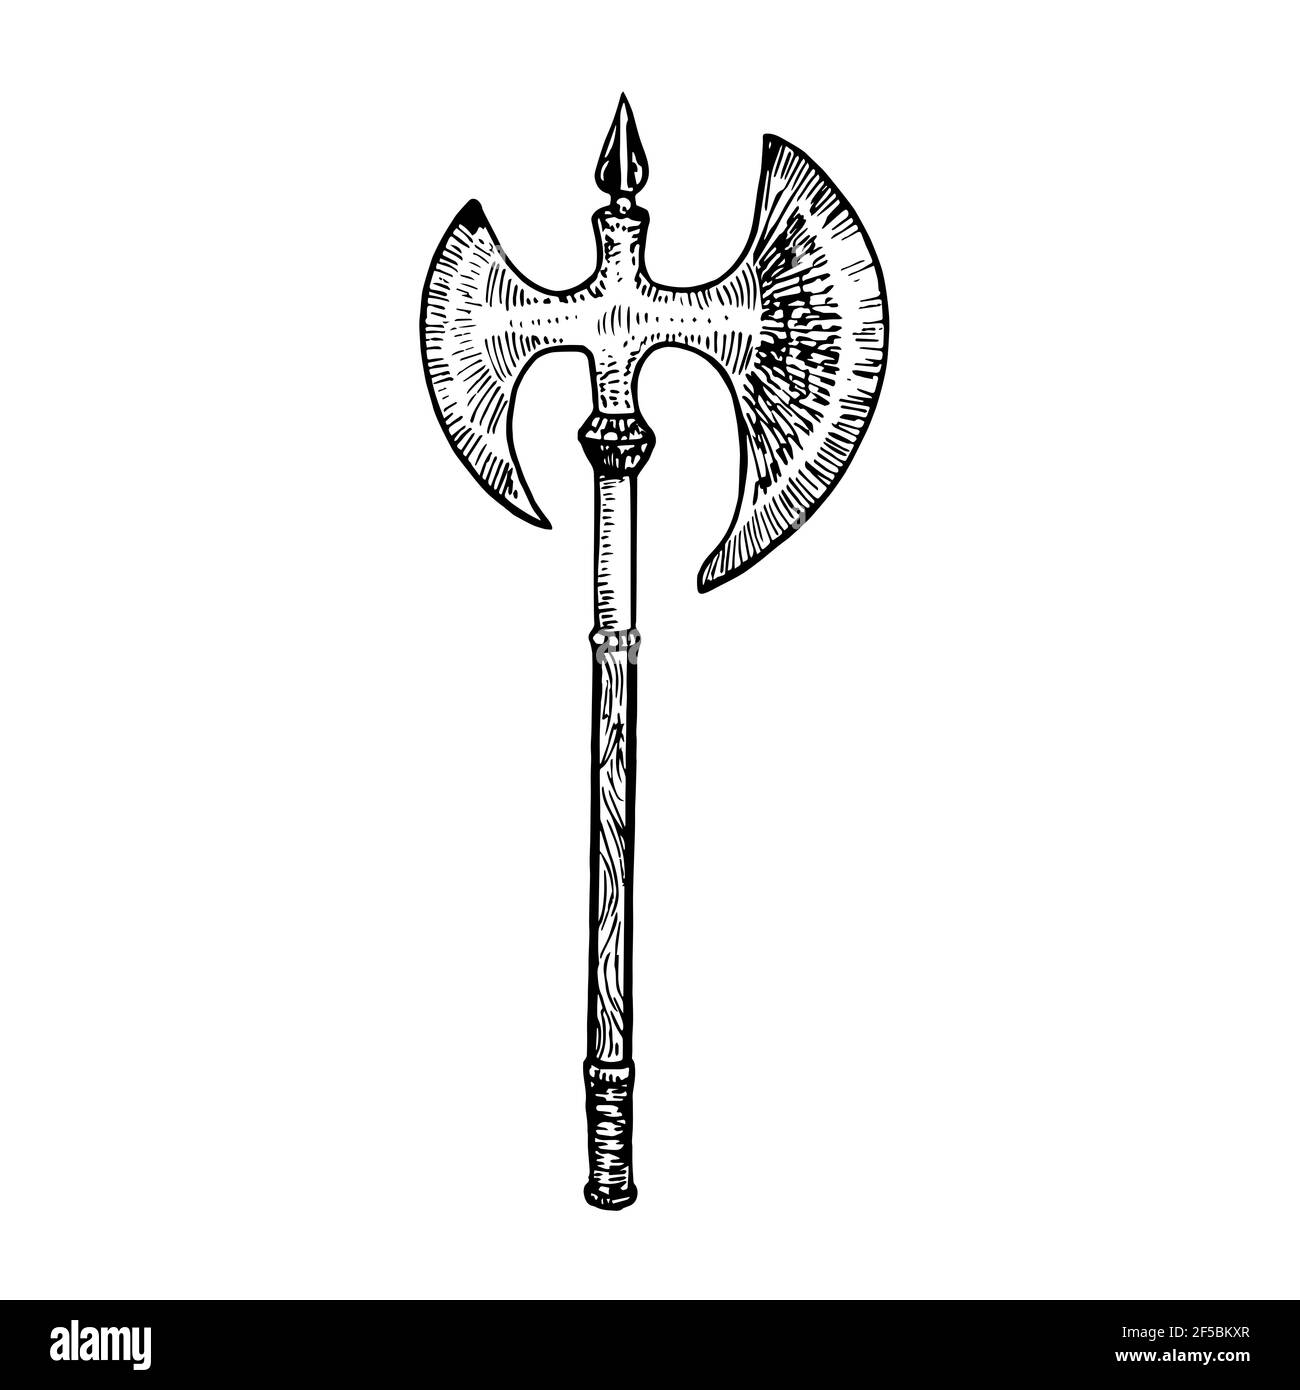 Battle axe with wooden handle, gravure style hand drawn outline illustration Stock Photo